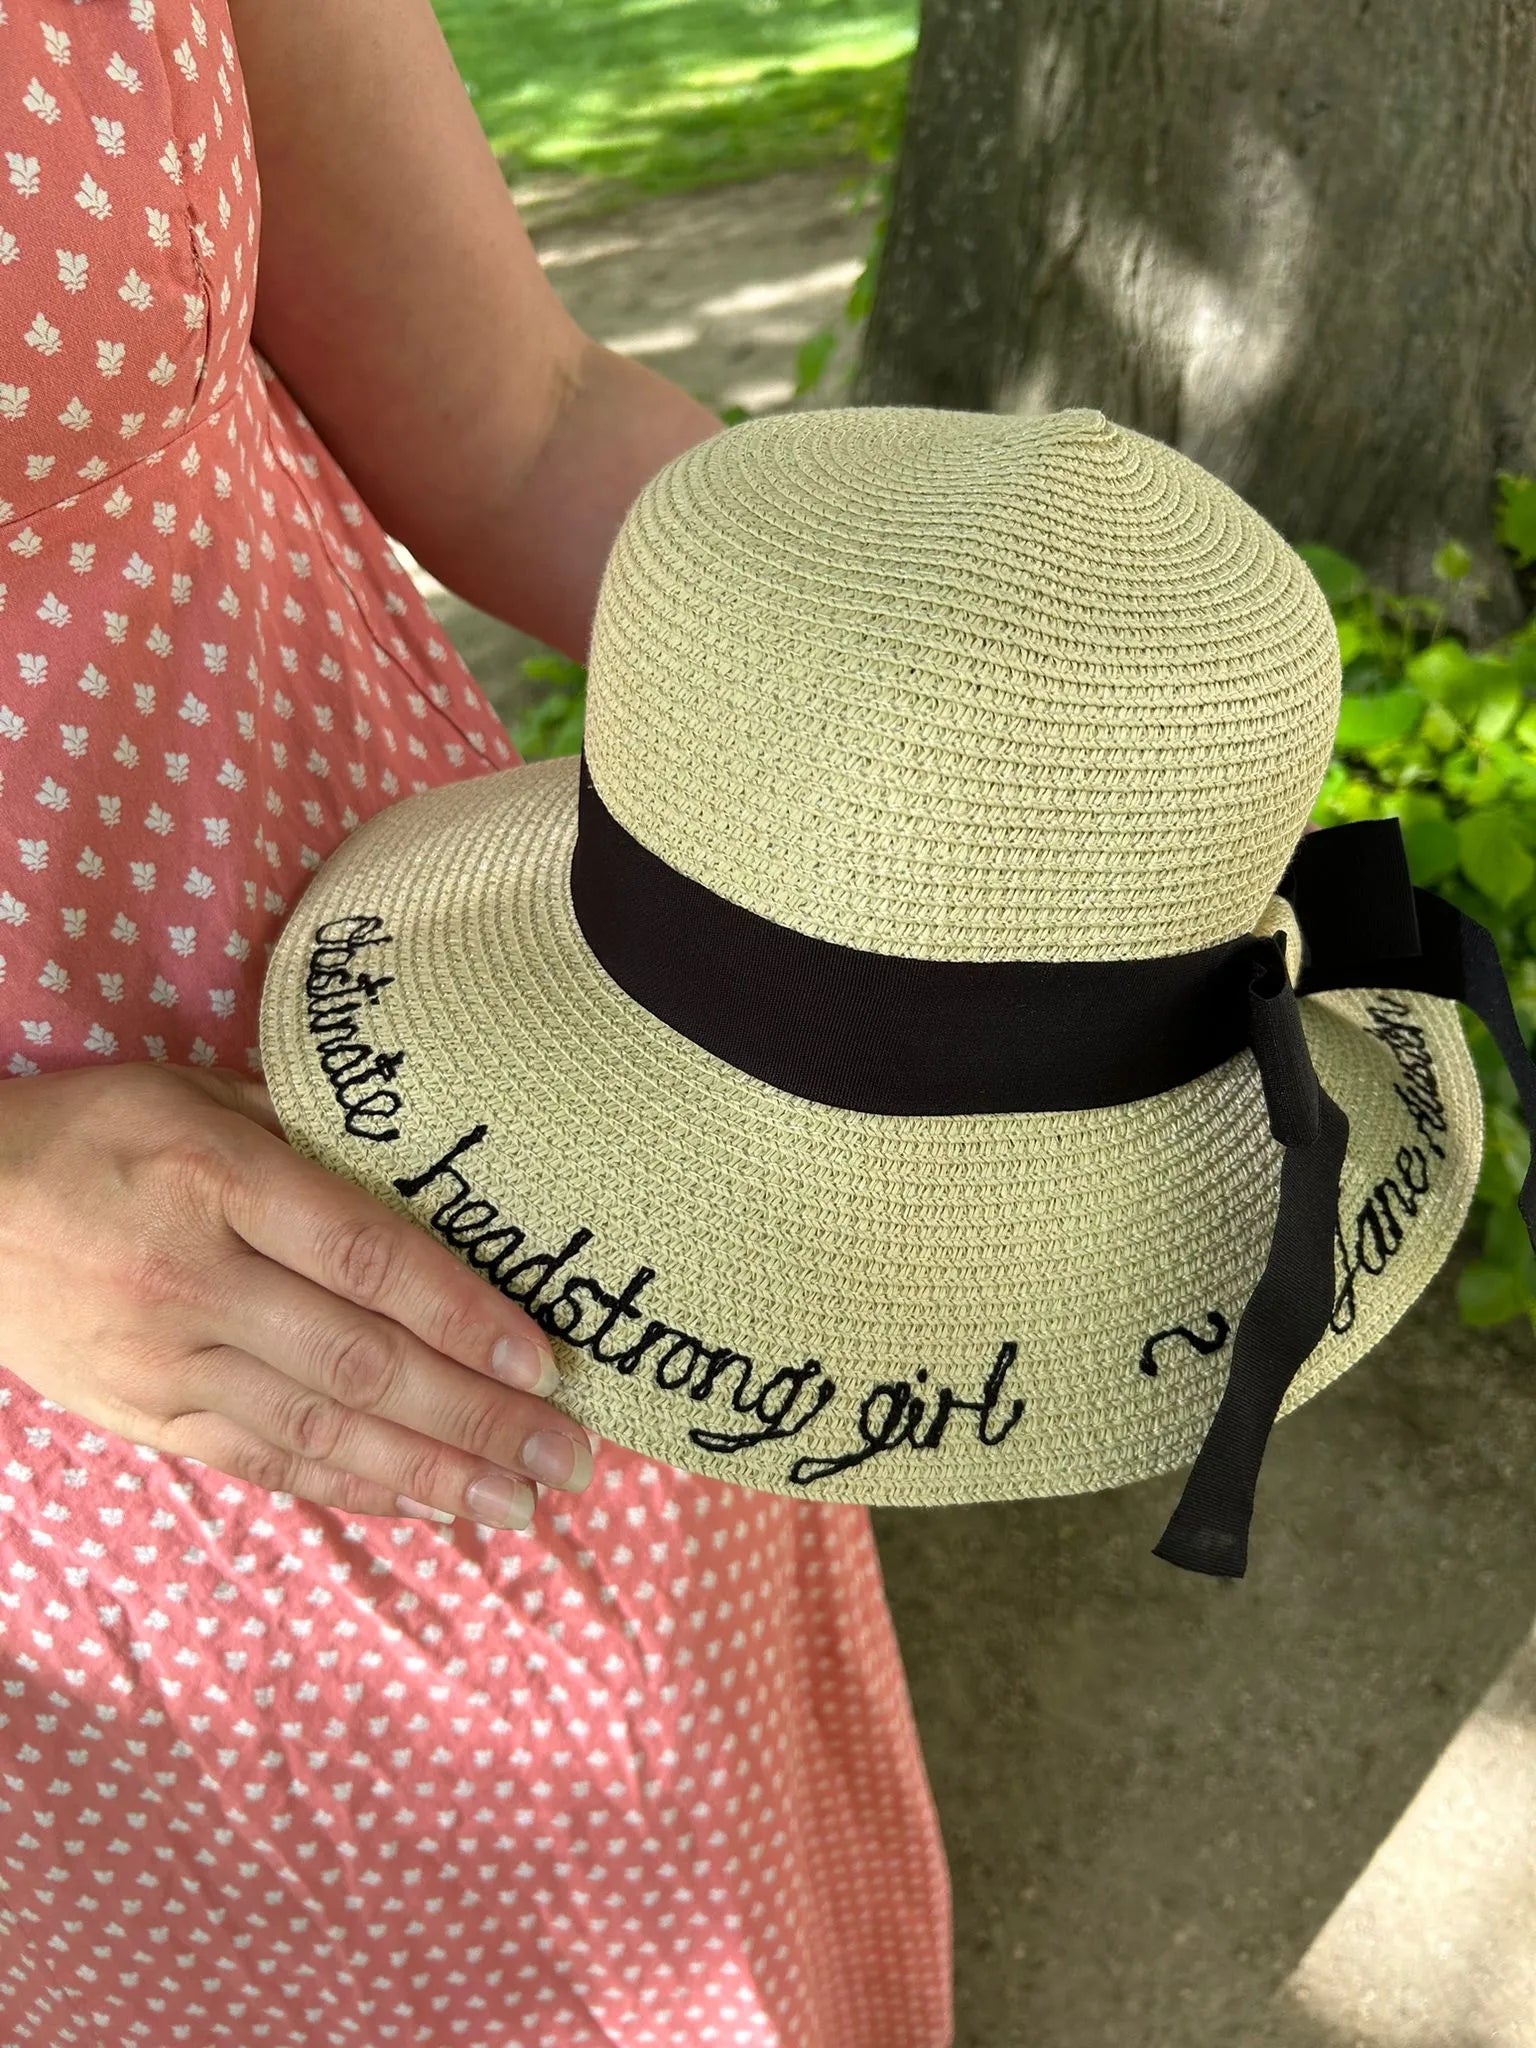 'Obstinate headstrong girl' Foldable Sun Hat with Ribbon and Travel Bag